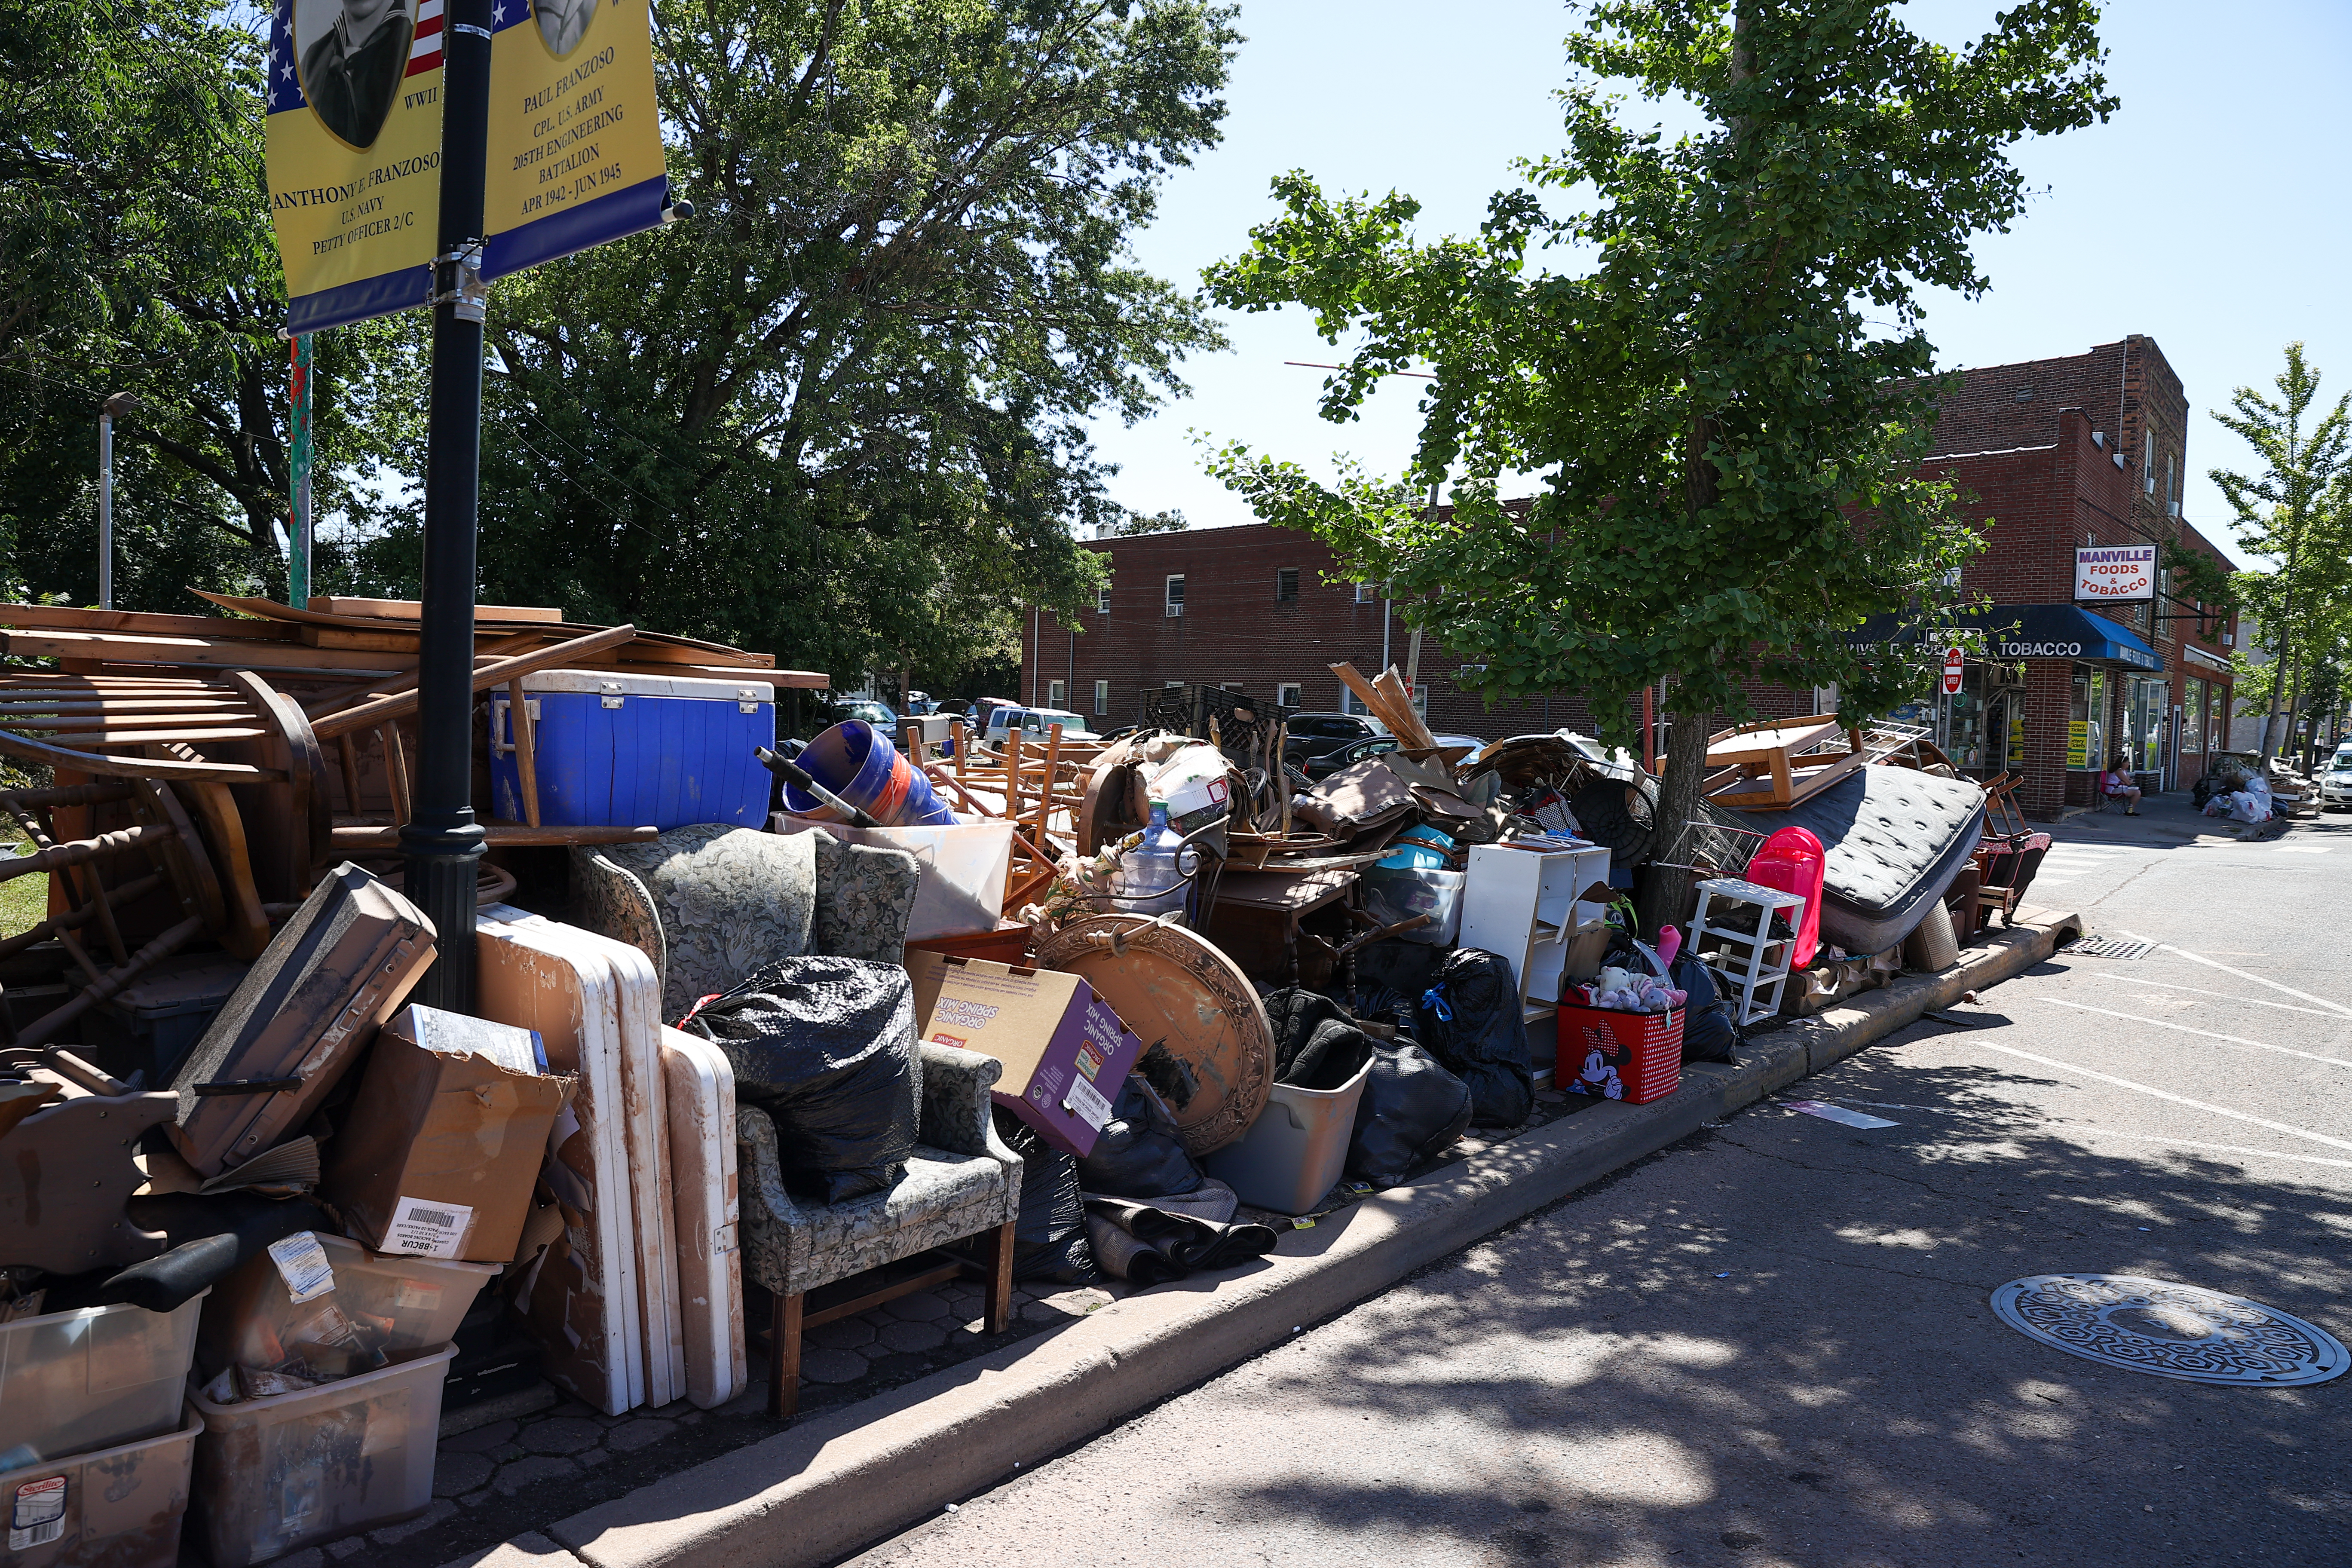 Residents left their belongings on the sidewalk after heavy rain and storm from remnants of Hurricane Ida in Manville, New Jersey in early September, 2021. Fewer than 200 New Jersey residents have received the extended housing aid from FEMA that advocates say they're entitled to.